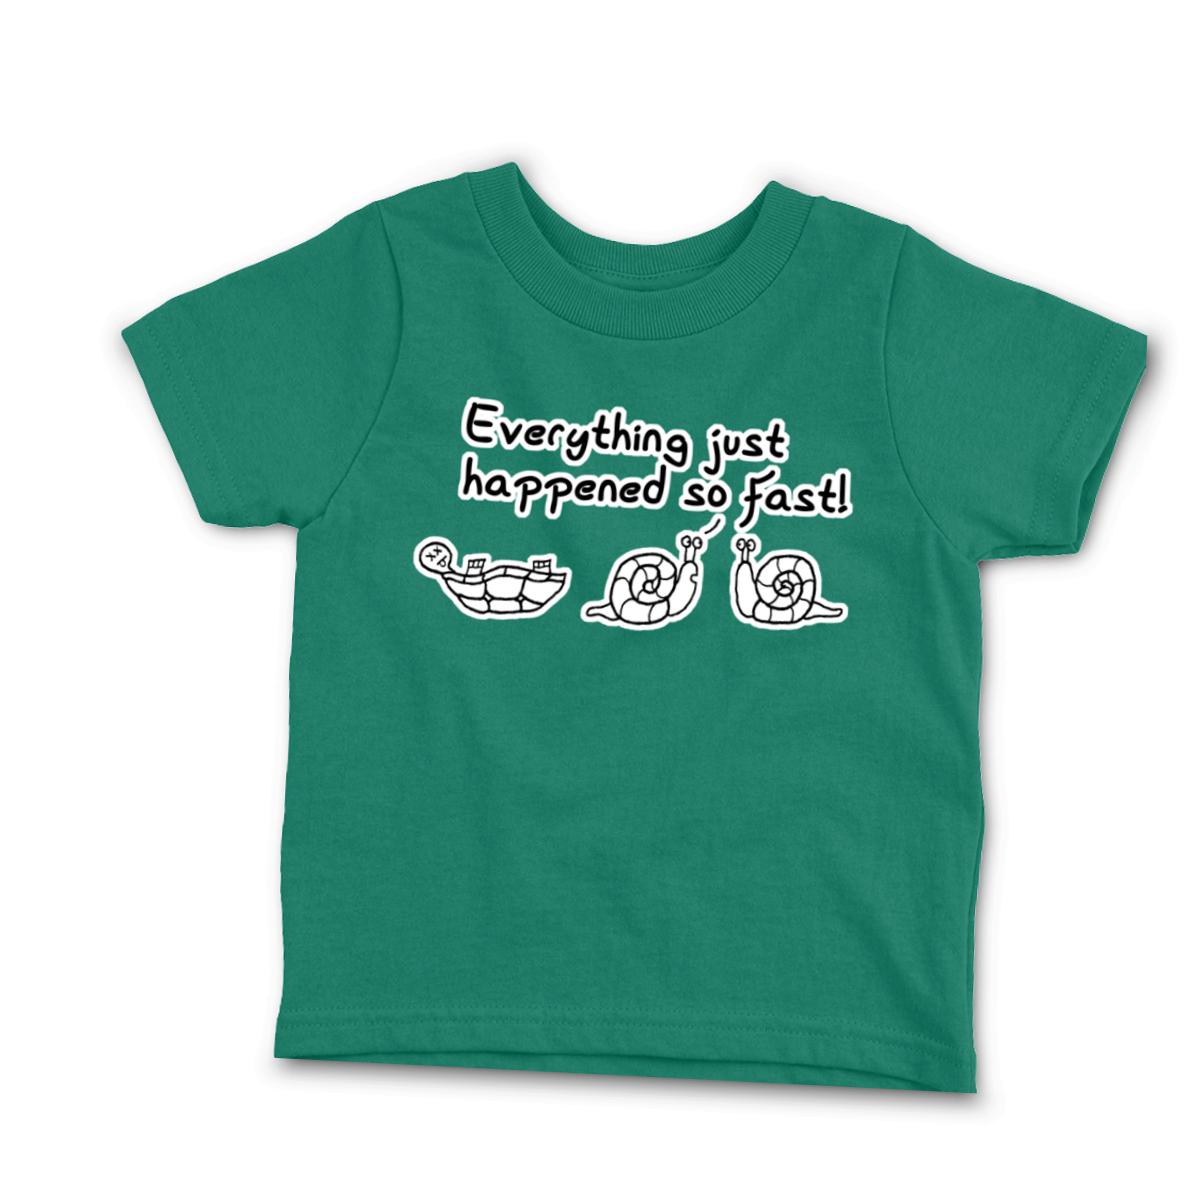 Happened So Fast Toddler Tee 4T kelly